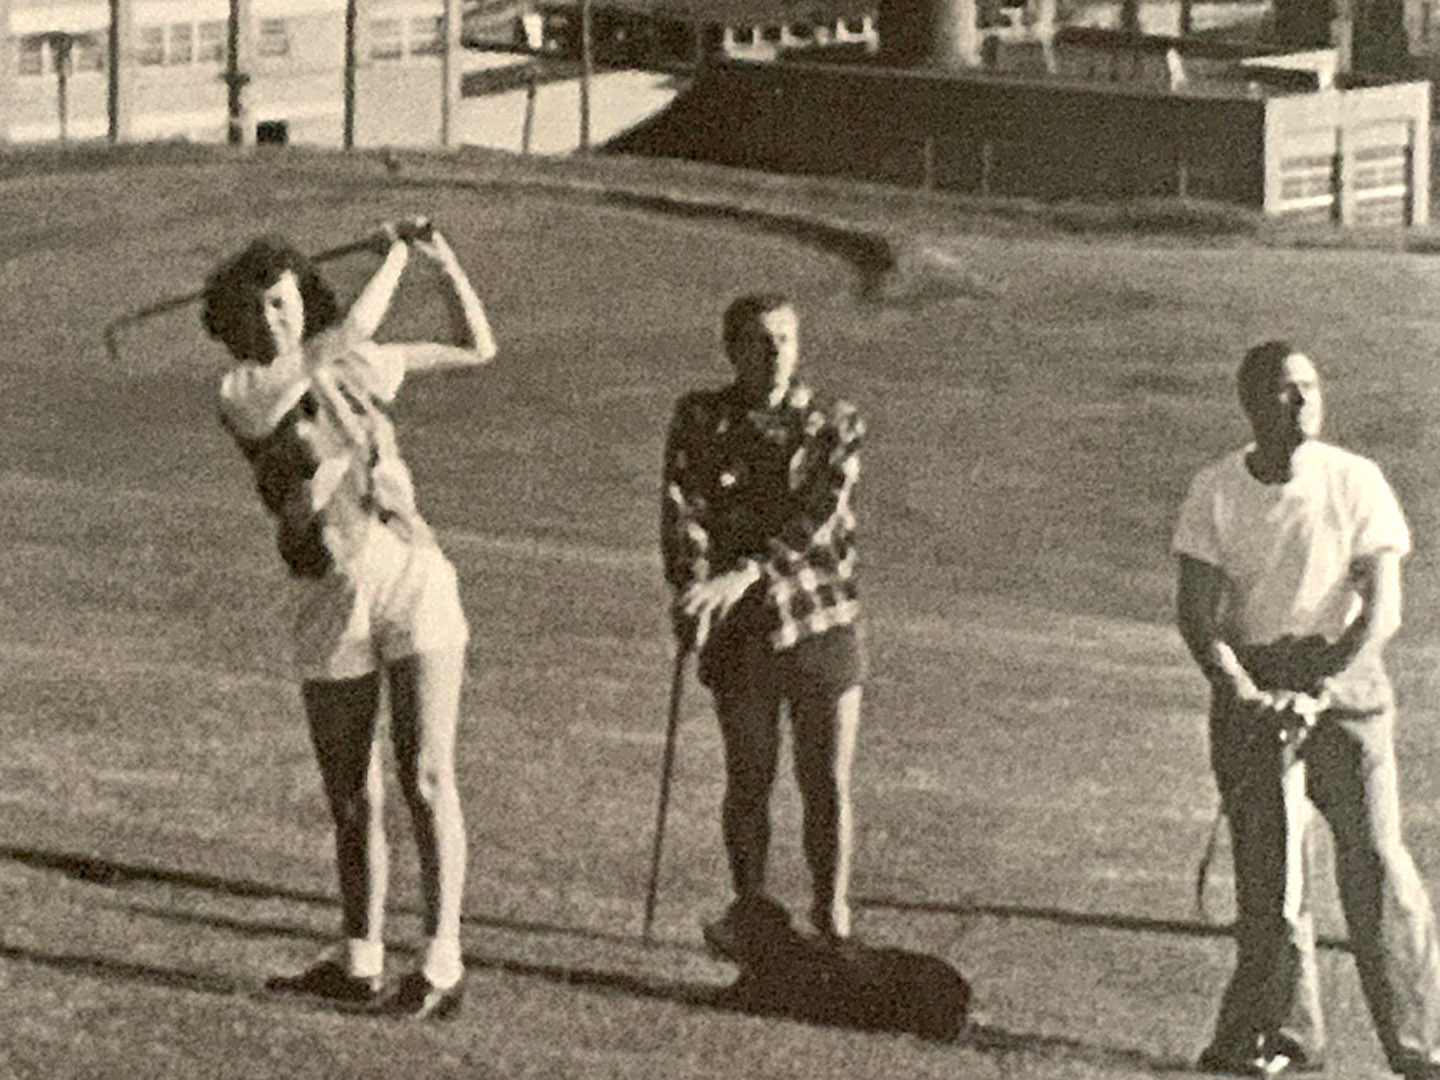 We have a long commitment to supporting outdoor recreation in the areas where we live, work and play. Black and white photo from 1956 - Canada Paper Company golf course on site.